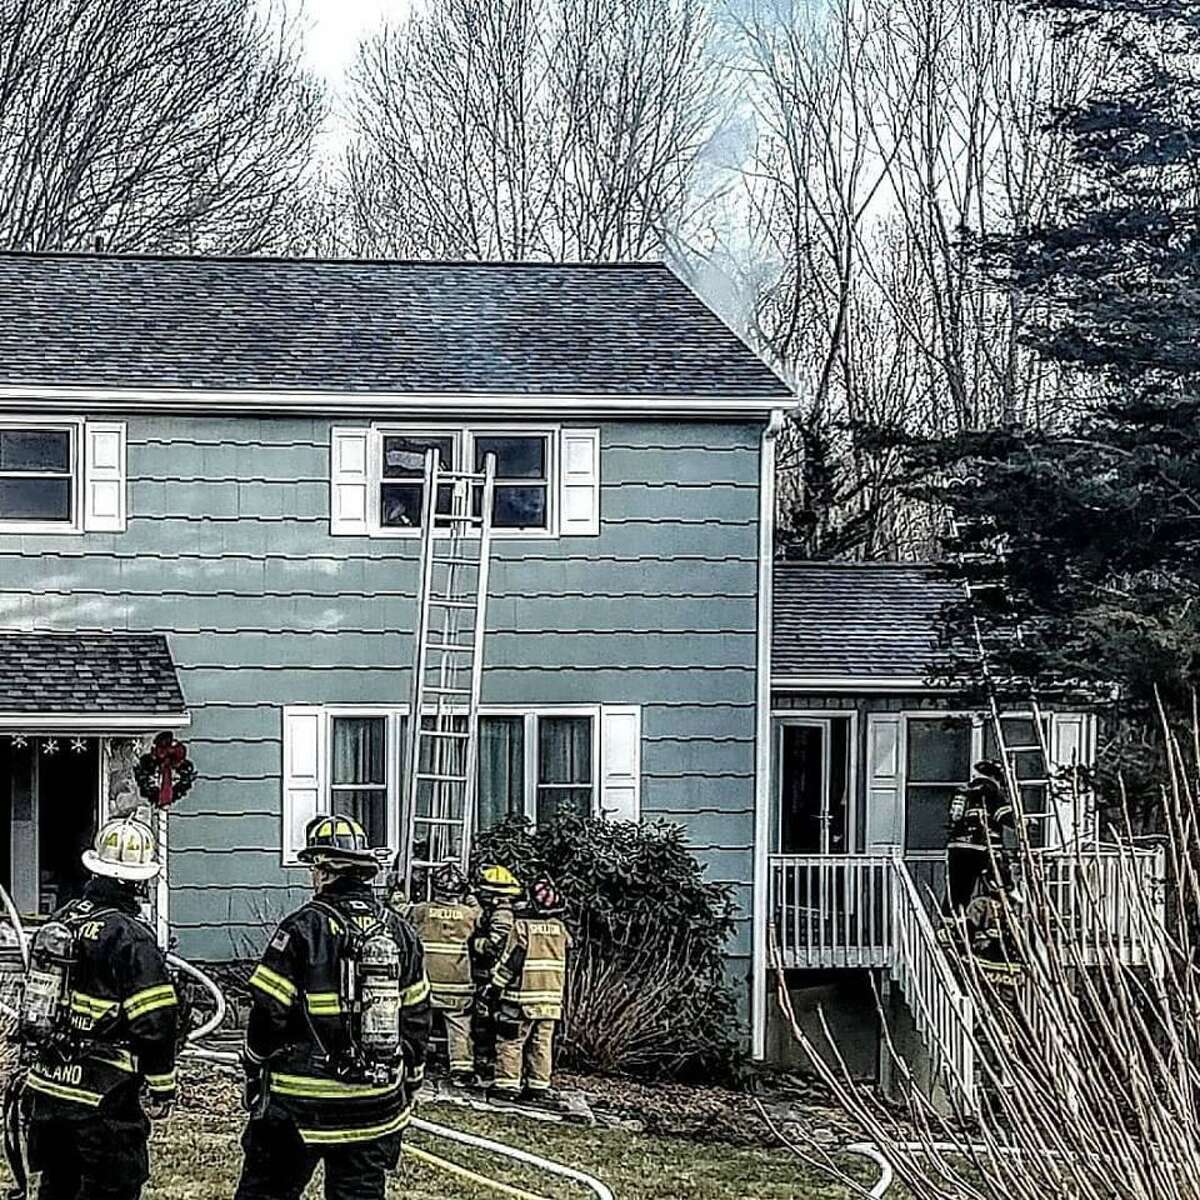 Shelton firefighters battled a blaze at a Gray Street home Feb. 10, 2019, that involved several crews, but no one was injured and damage was kept mostly to one part of the house.